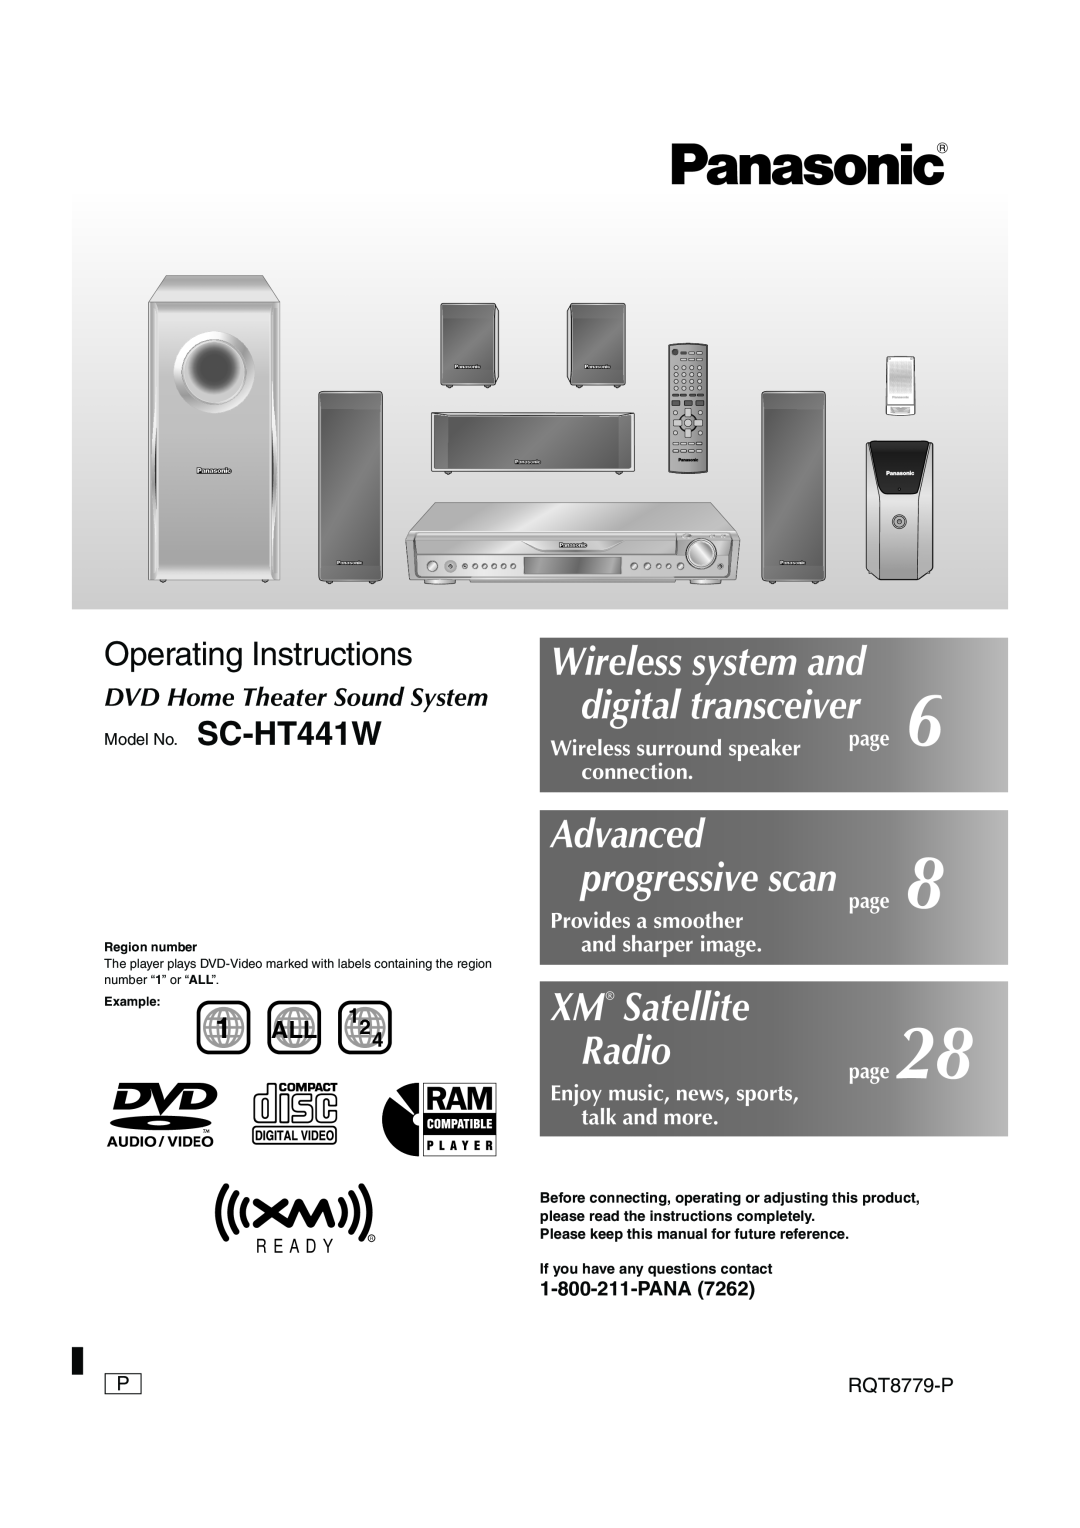 Panasonic SC-HT441W manual DVD Home Theater Sound System, RQT8779-P, R E A D Y, HT441WEn.bookPage1Friday,June9,20065 43PM 